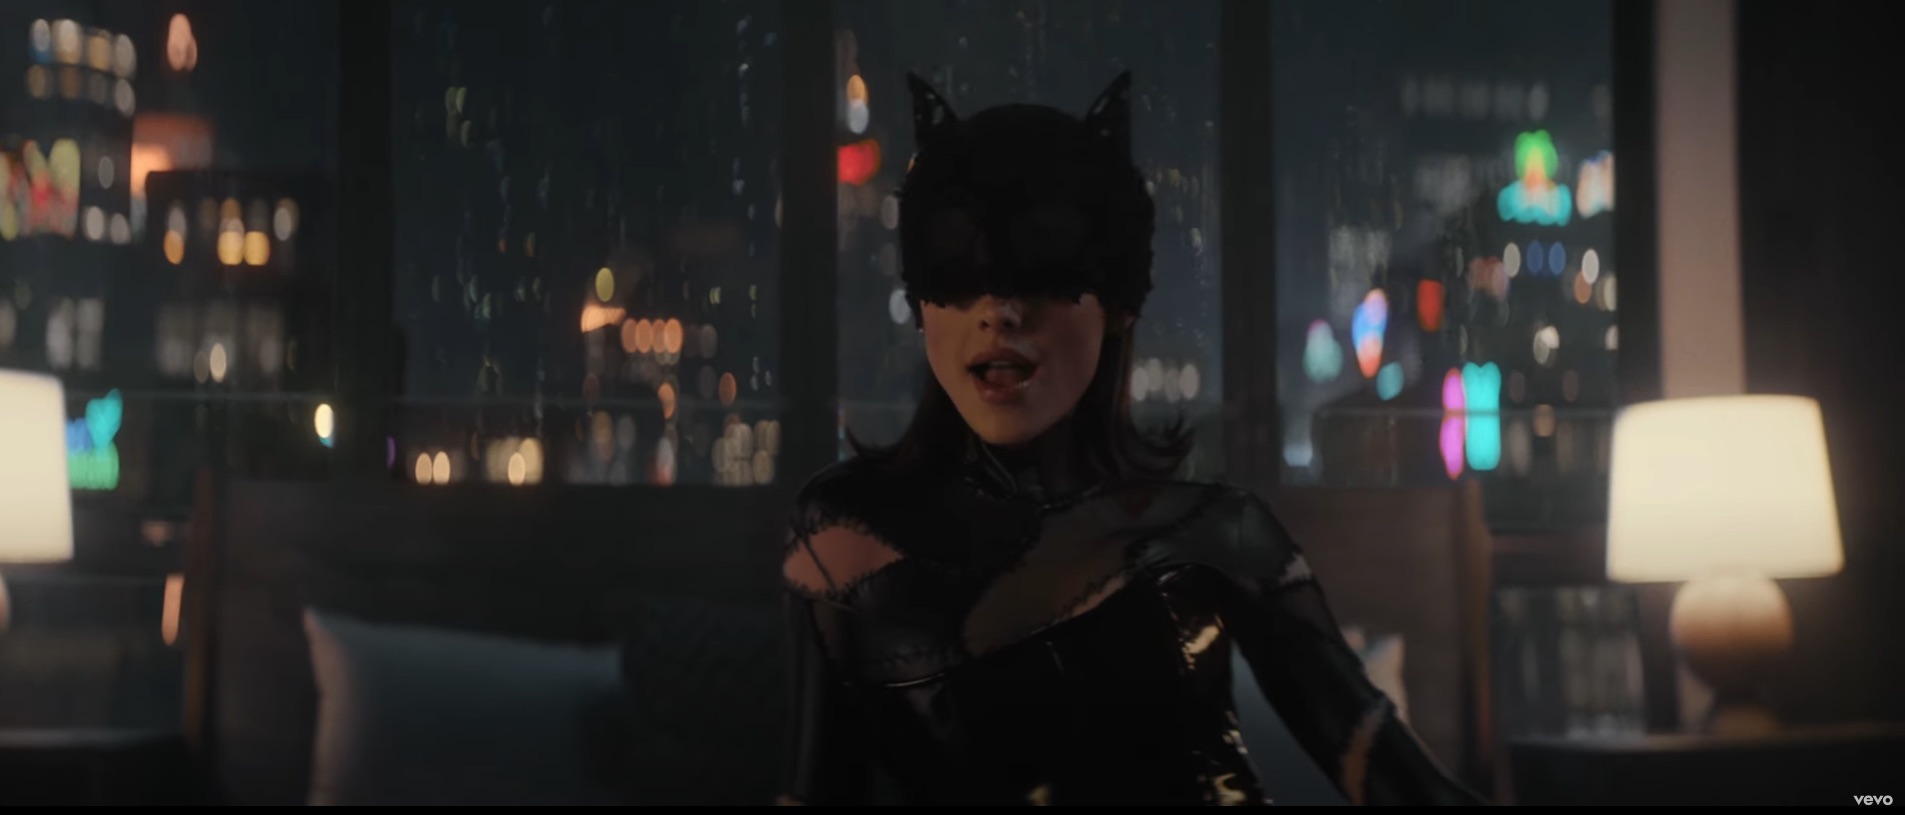 Ariana's makeup hack came as she got her Catwoman persona from the music video